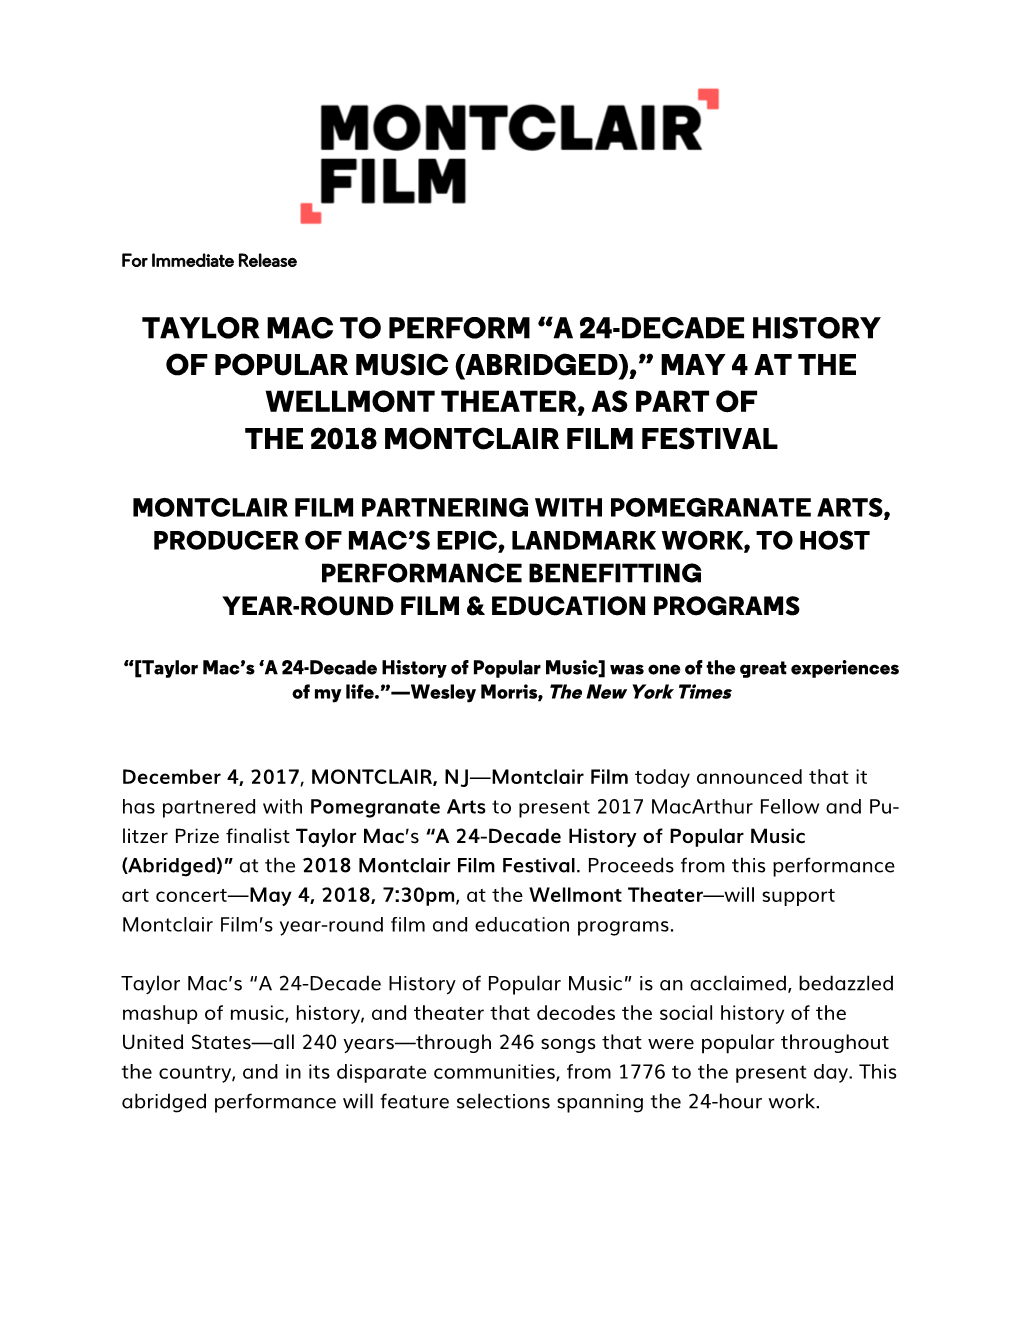 Taylor Mac to Perform “A 24-Decade History of Popular Music (Abridged),” May 4 at the Wellmont Theater, As Part of the 2018 Montclair Film Festival